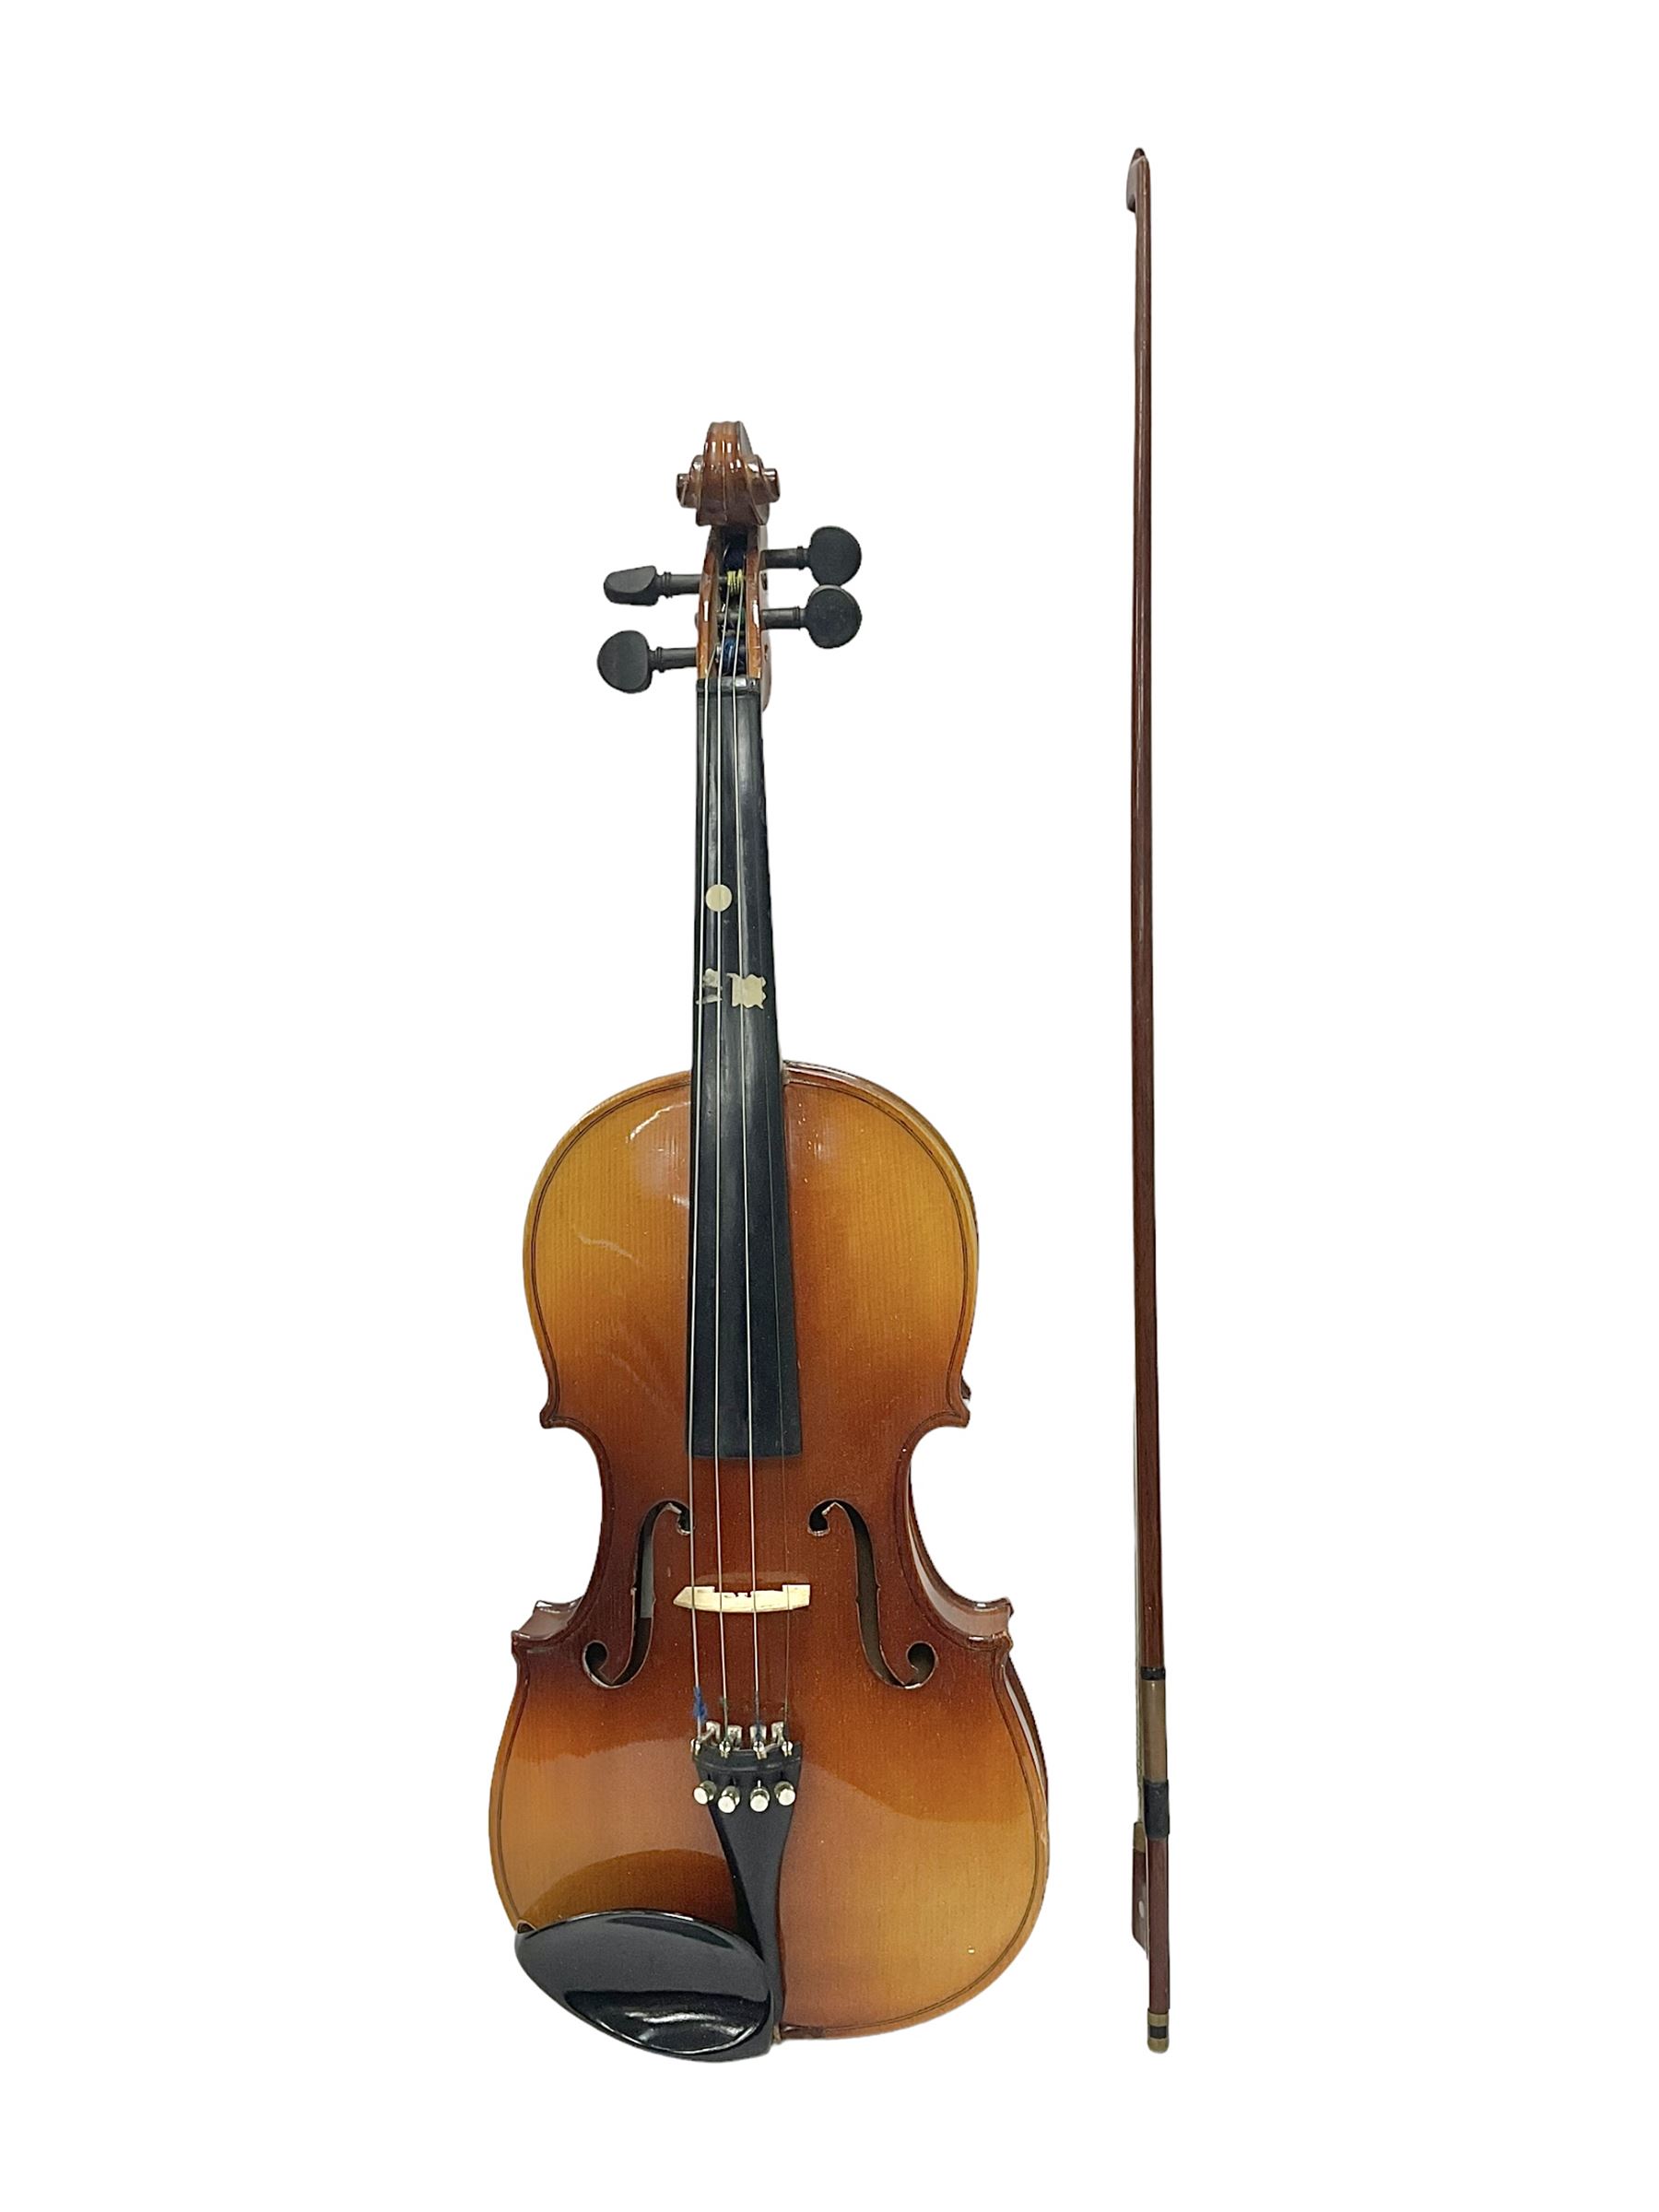 Full size violin with a maple back and ribs